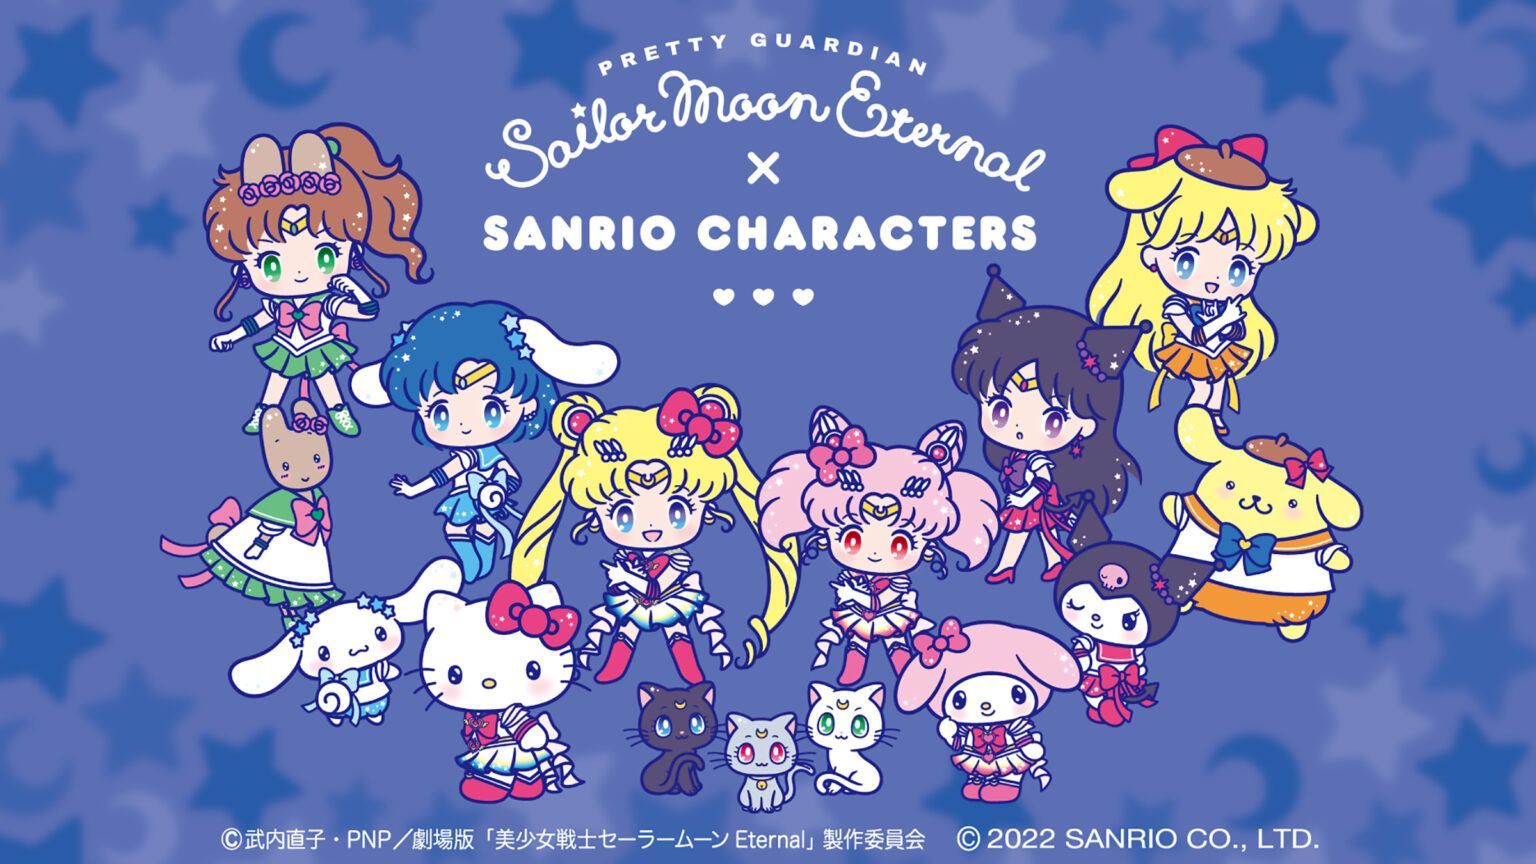 A promotional image for the Pretty Guardian Sailor Moon Eternal x Sanrio Characters collaboration featuring the characters from the Sailor Moon series as Sanrio characters. - Sanrio